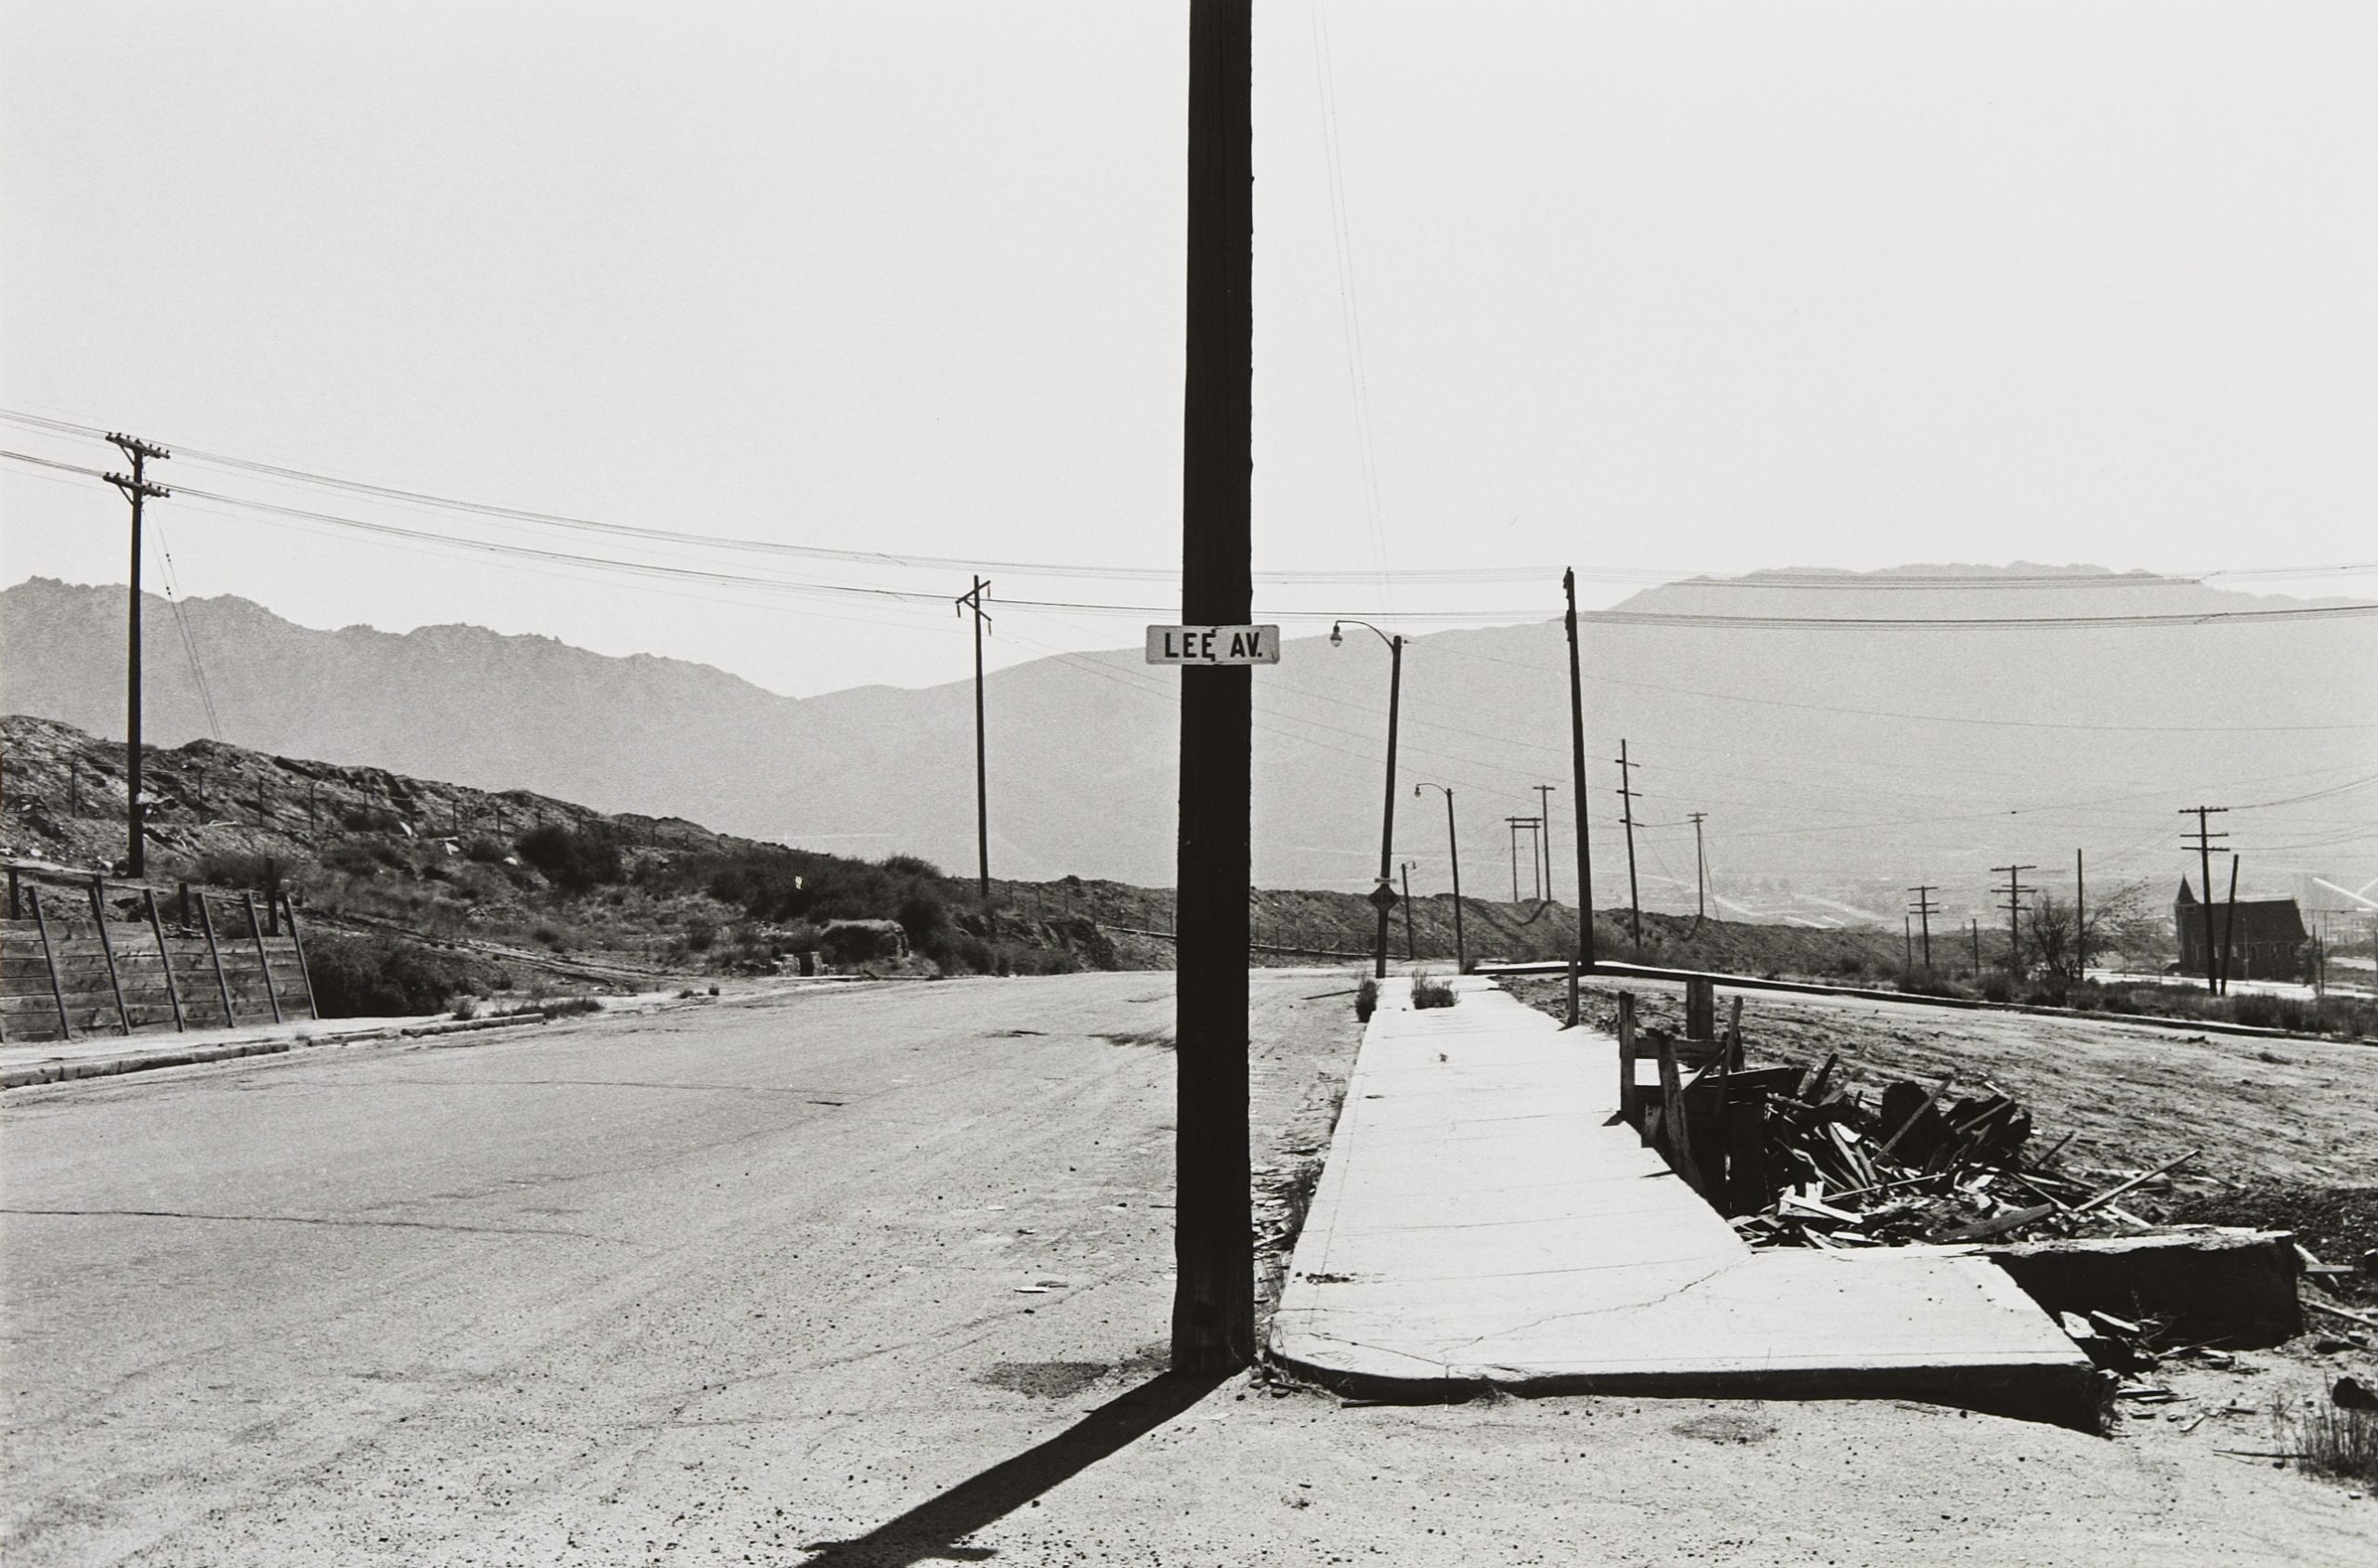 Black and white photograph of a semi-industrial rural road, bordered by telephone poles, with low hills beyond. A street sign on the centermost pole reads "Lee Av."